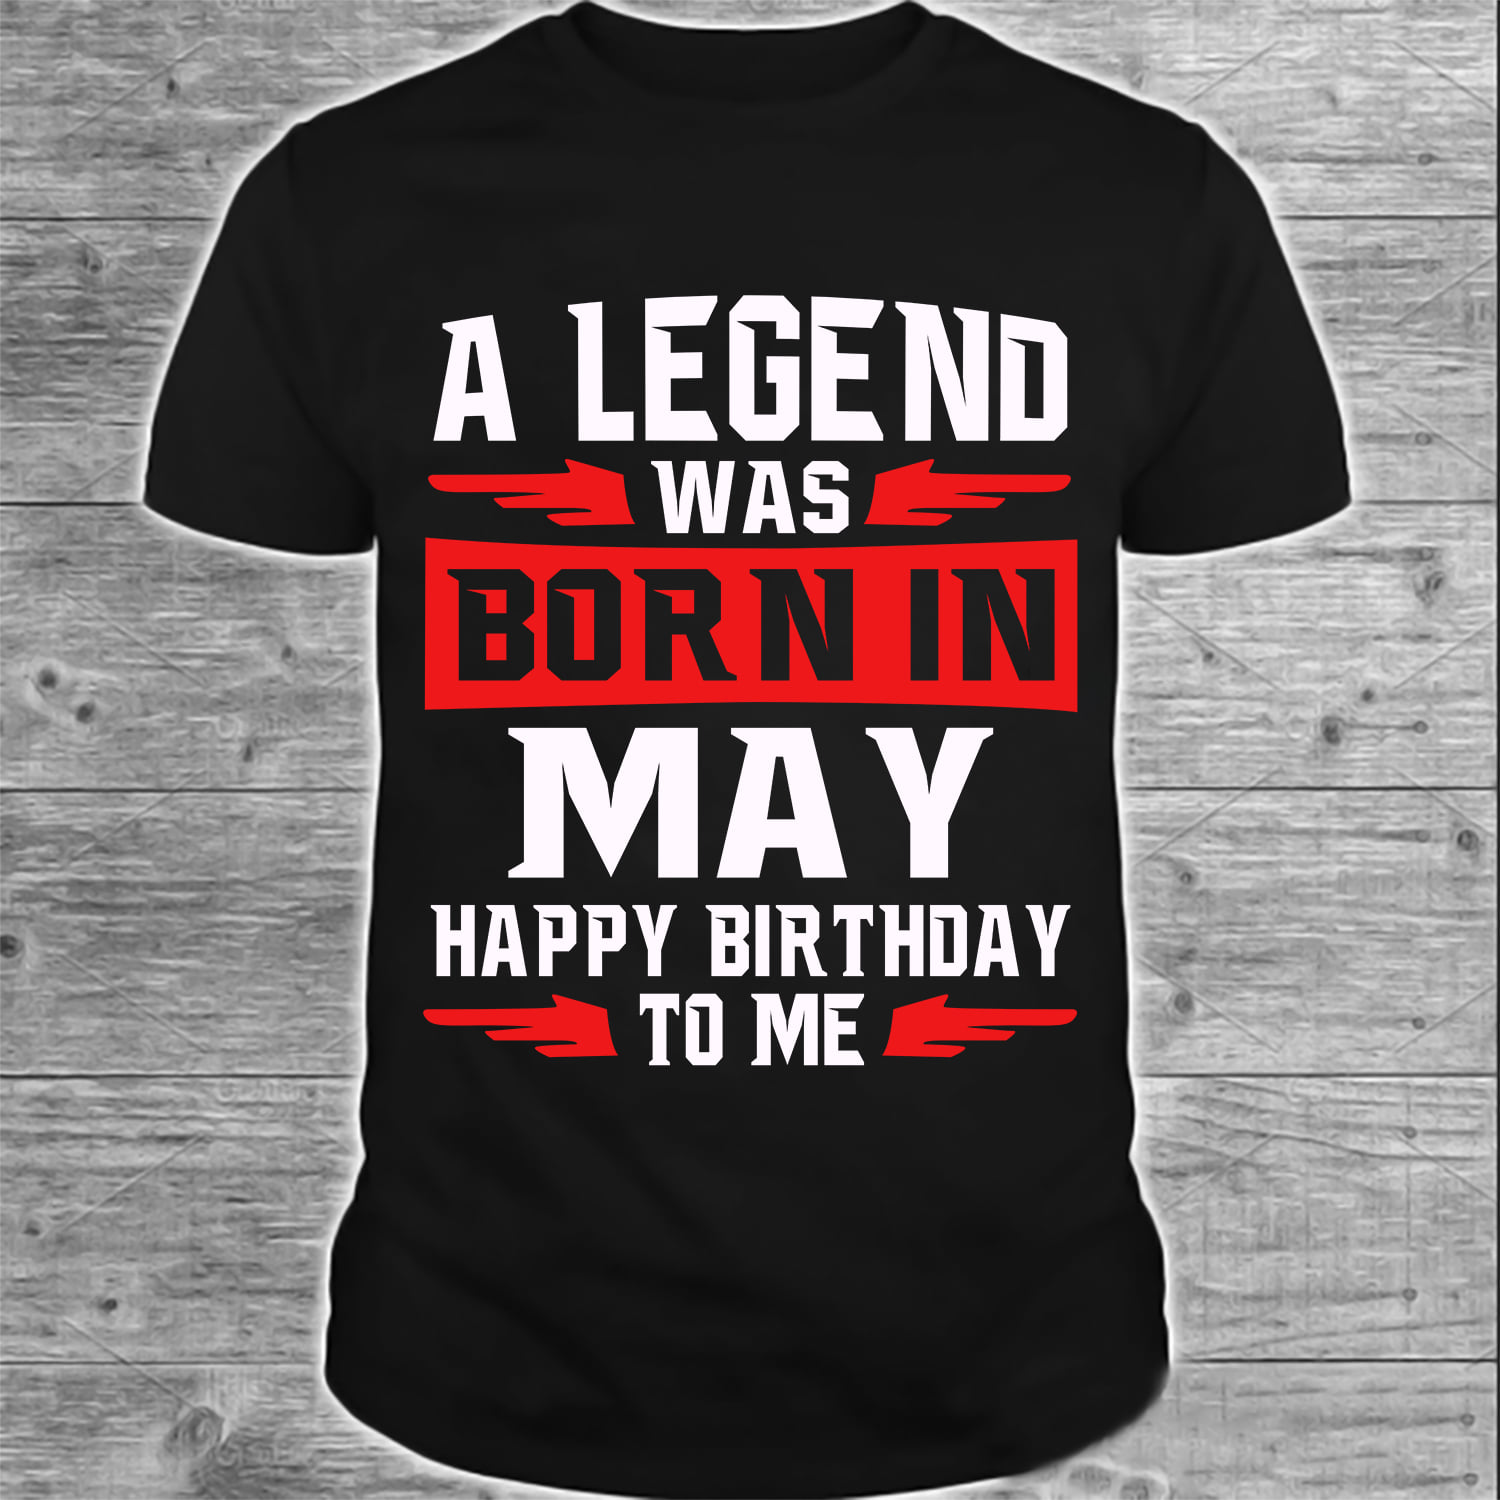 A legend was born in May - Happy birthday to me